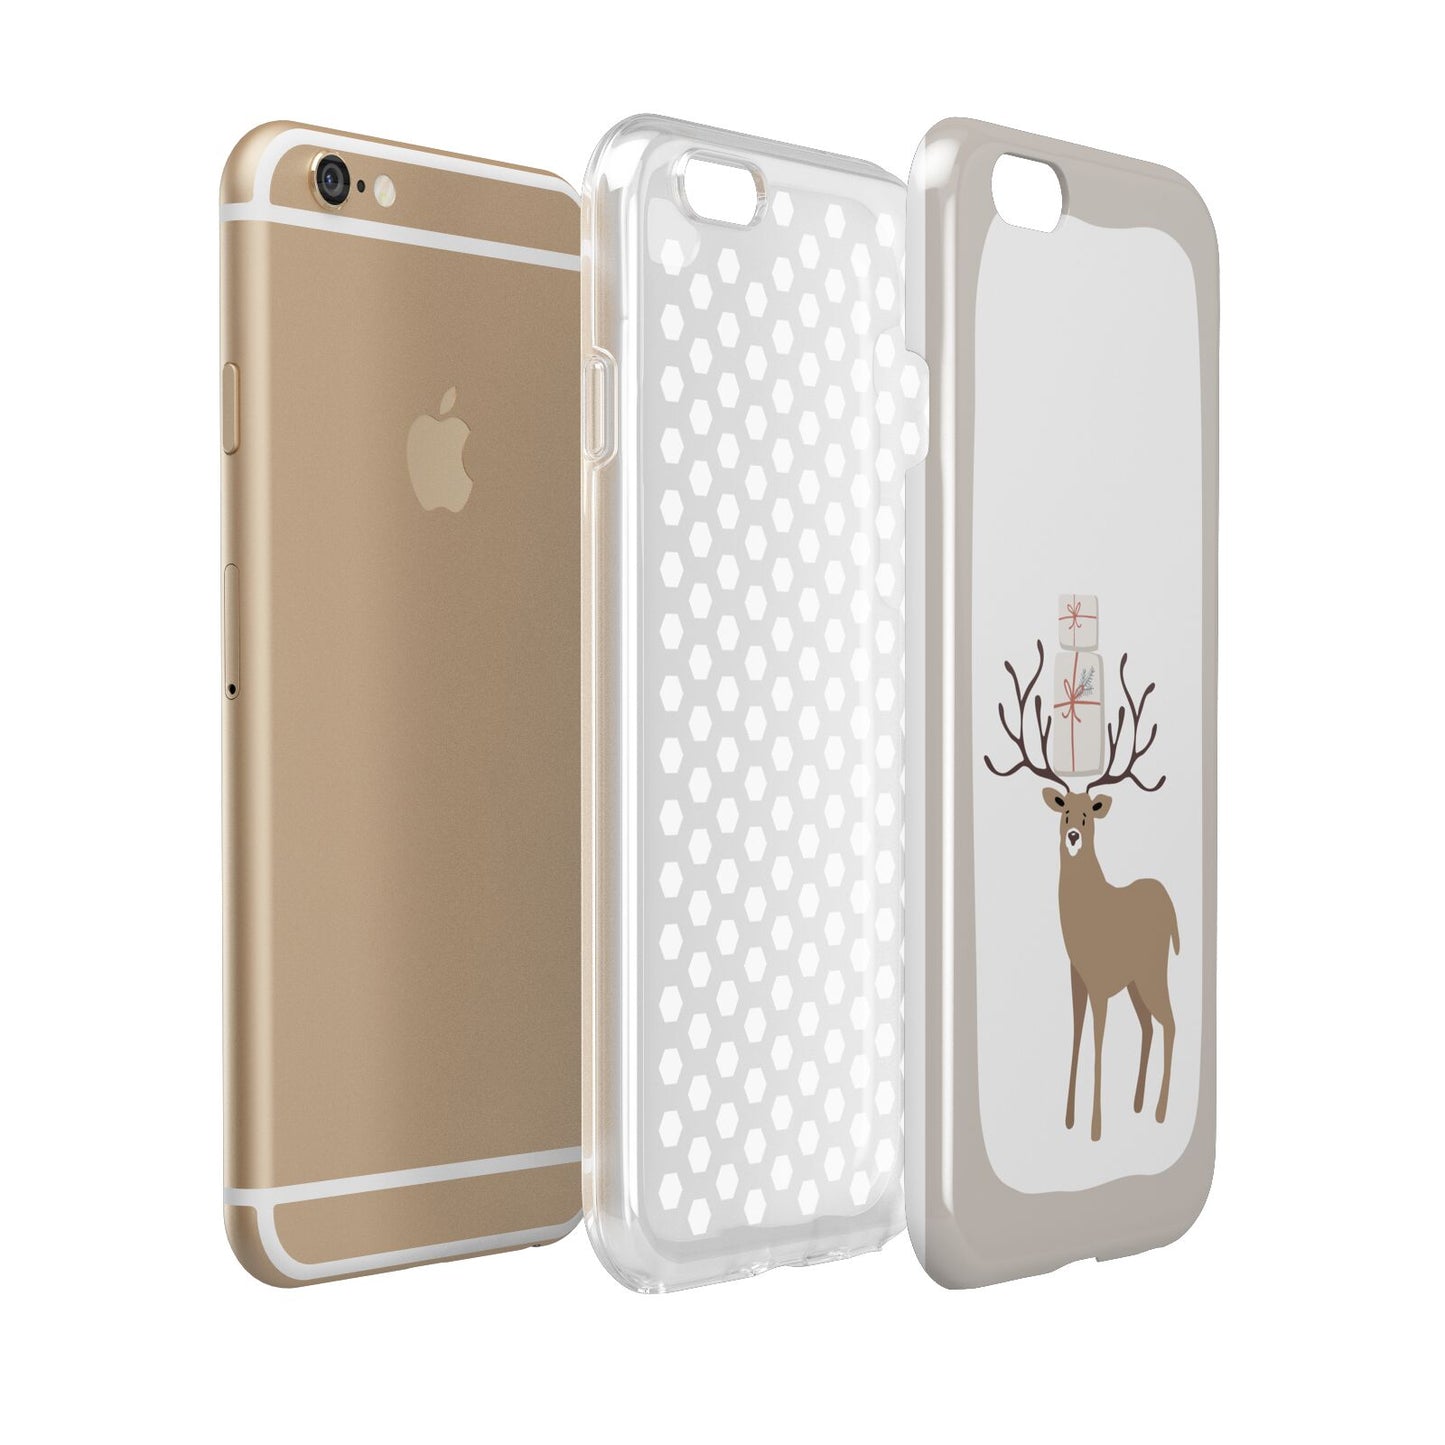 Reindeer Presents Apple iPhone 6 3D Tough Case Expanded view